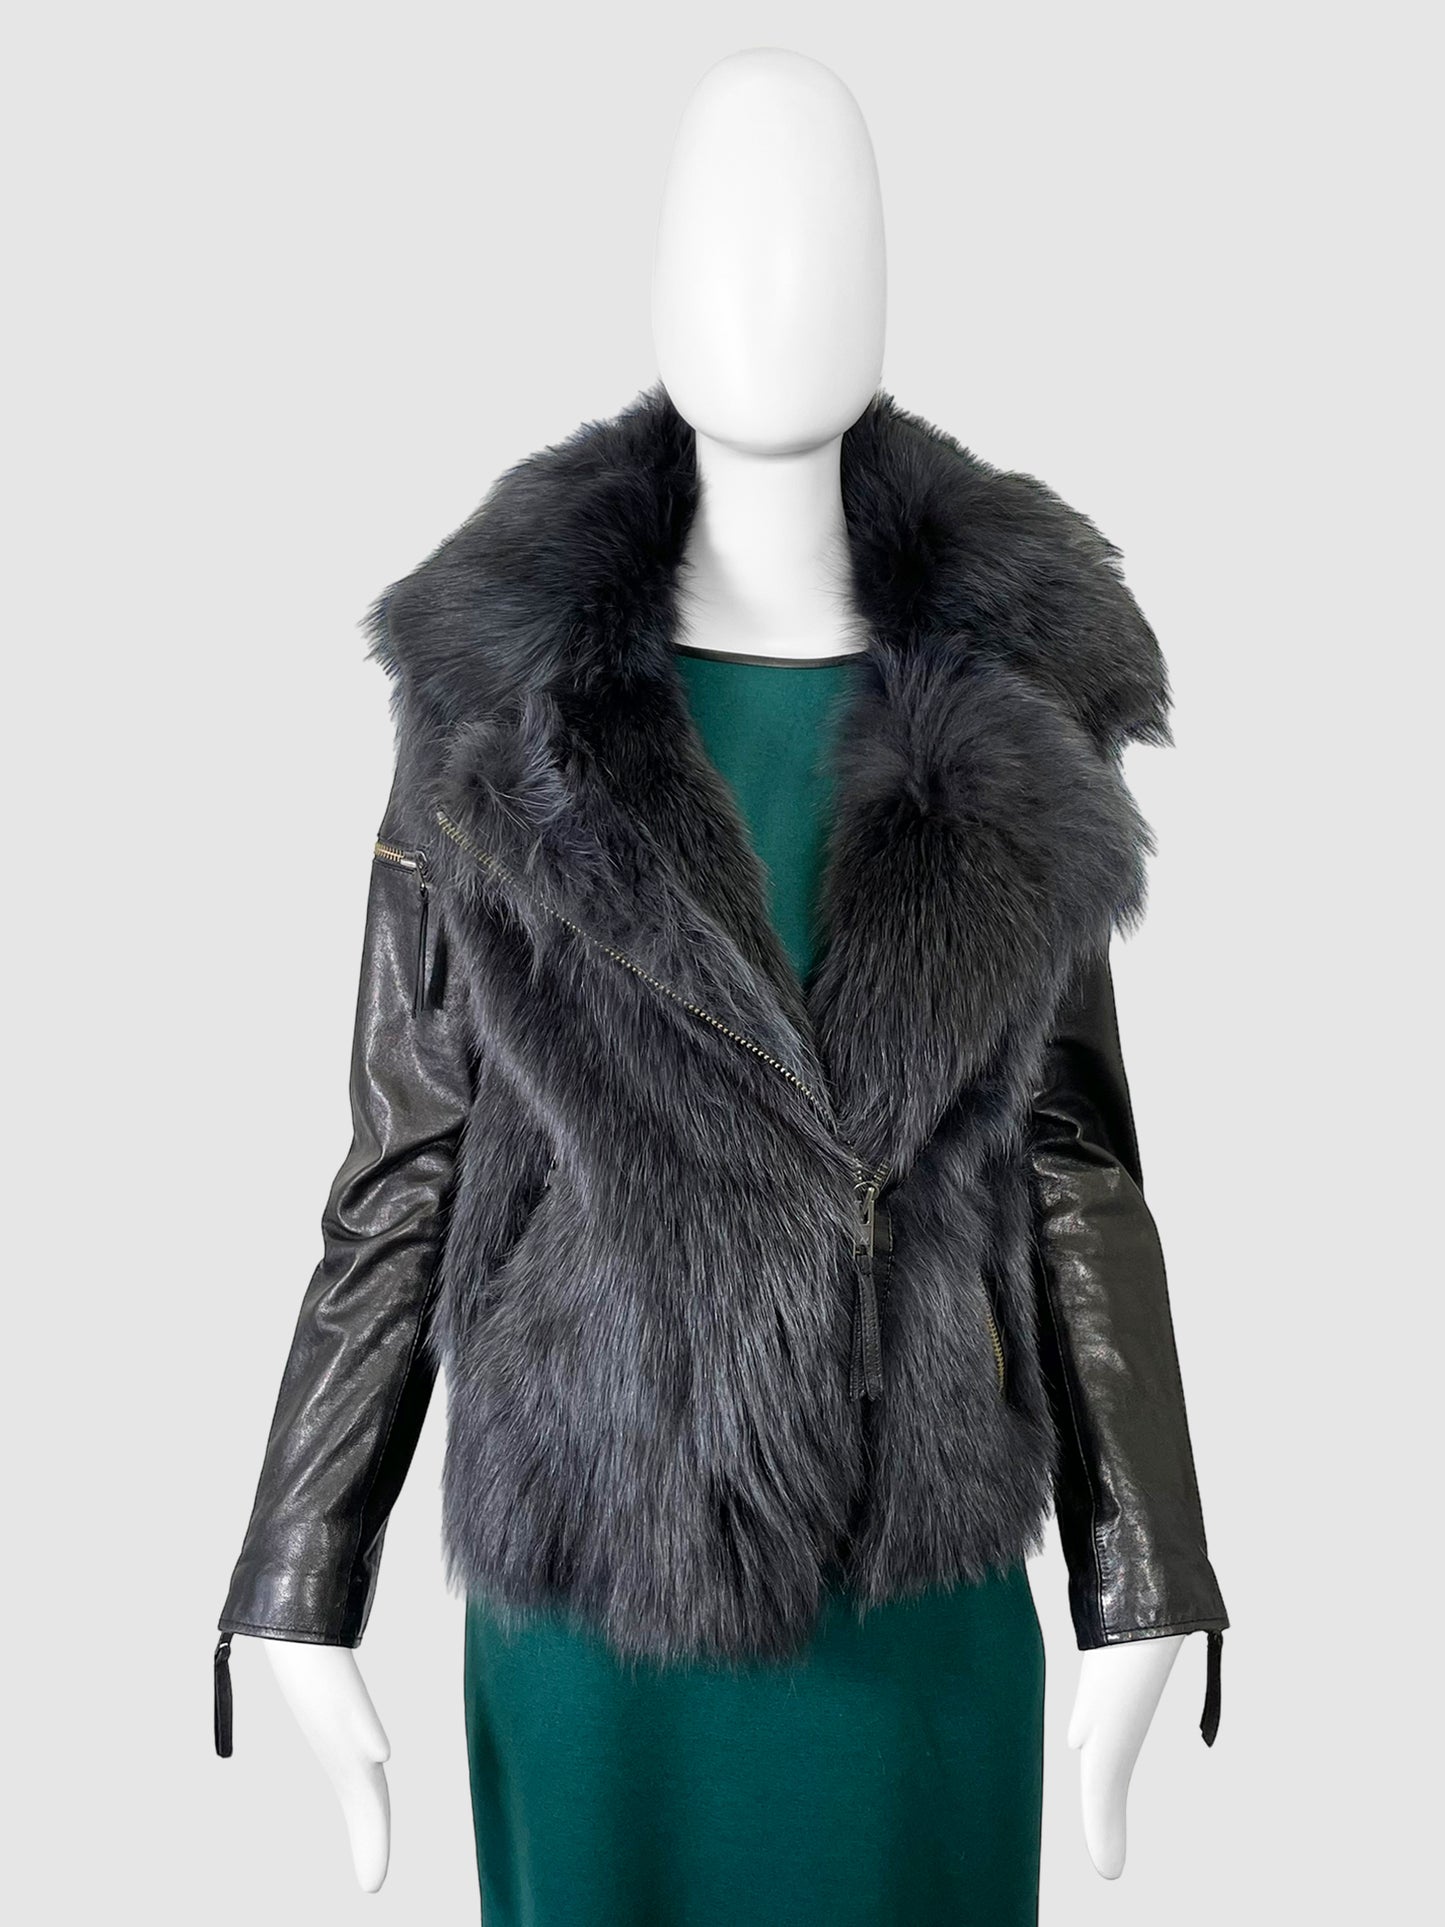 SAM. Leather Jacket with Fur - Size S/M